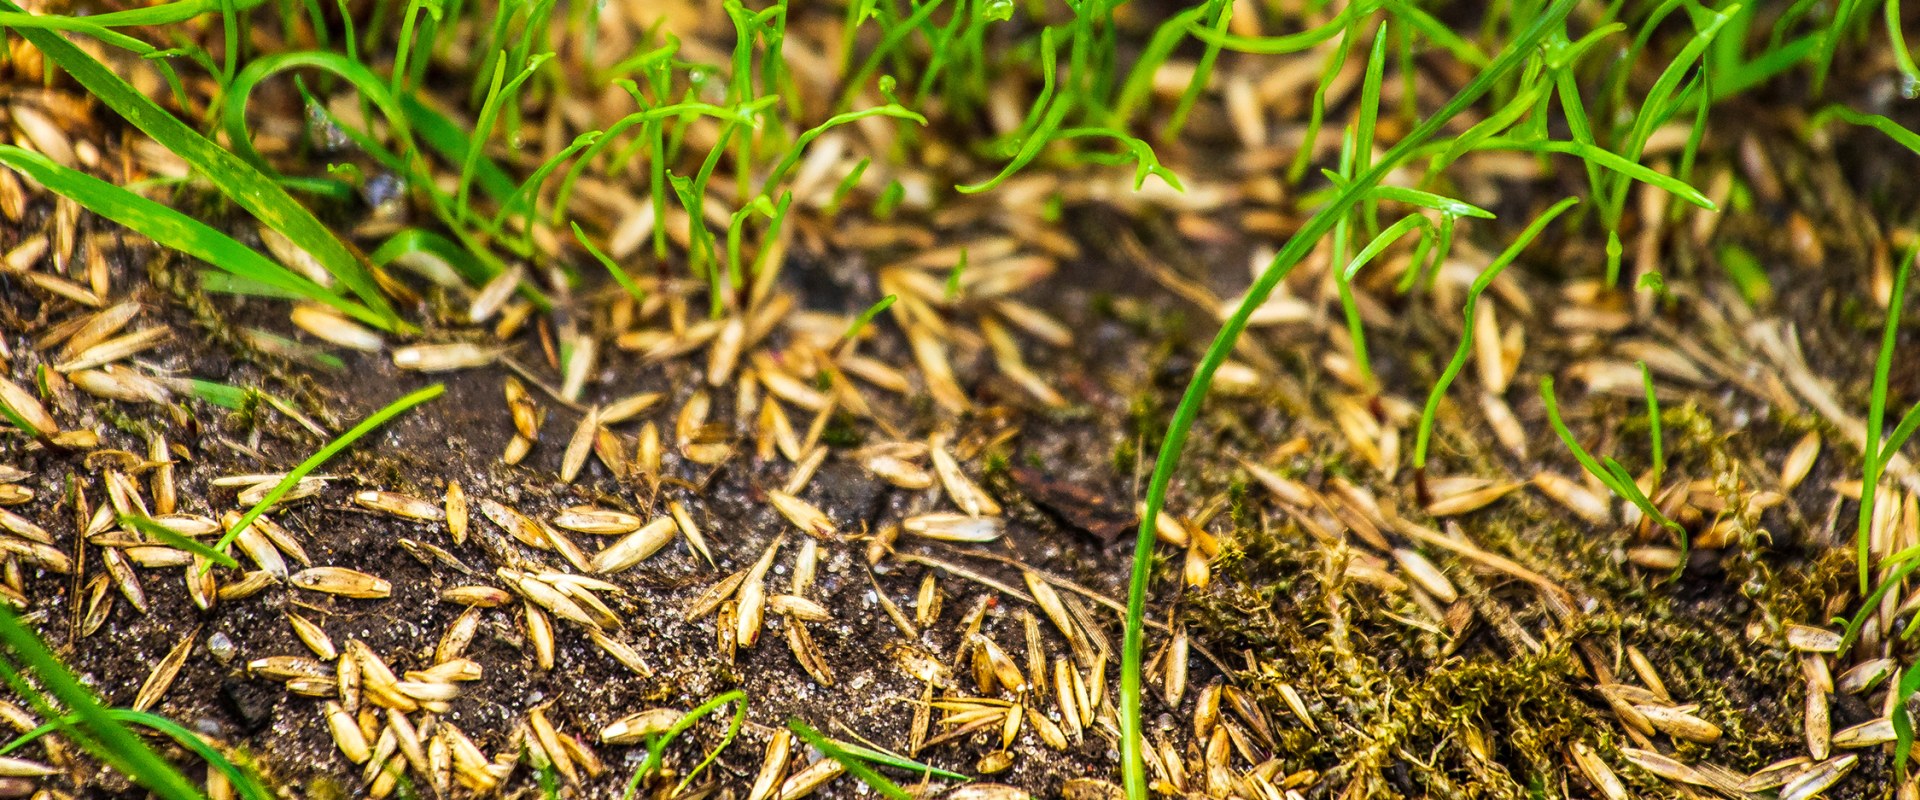 Will grass seed grow on top of dirt?